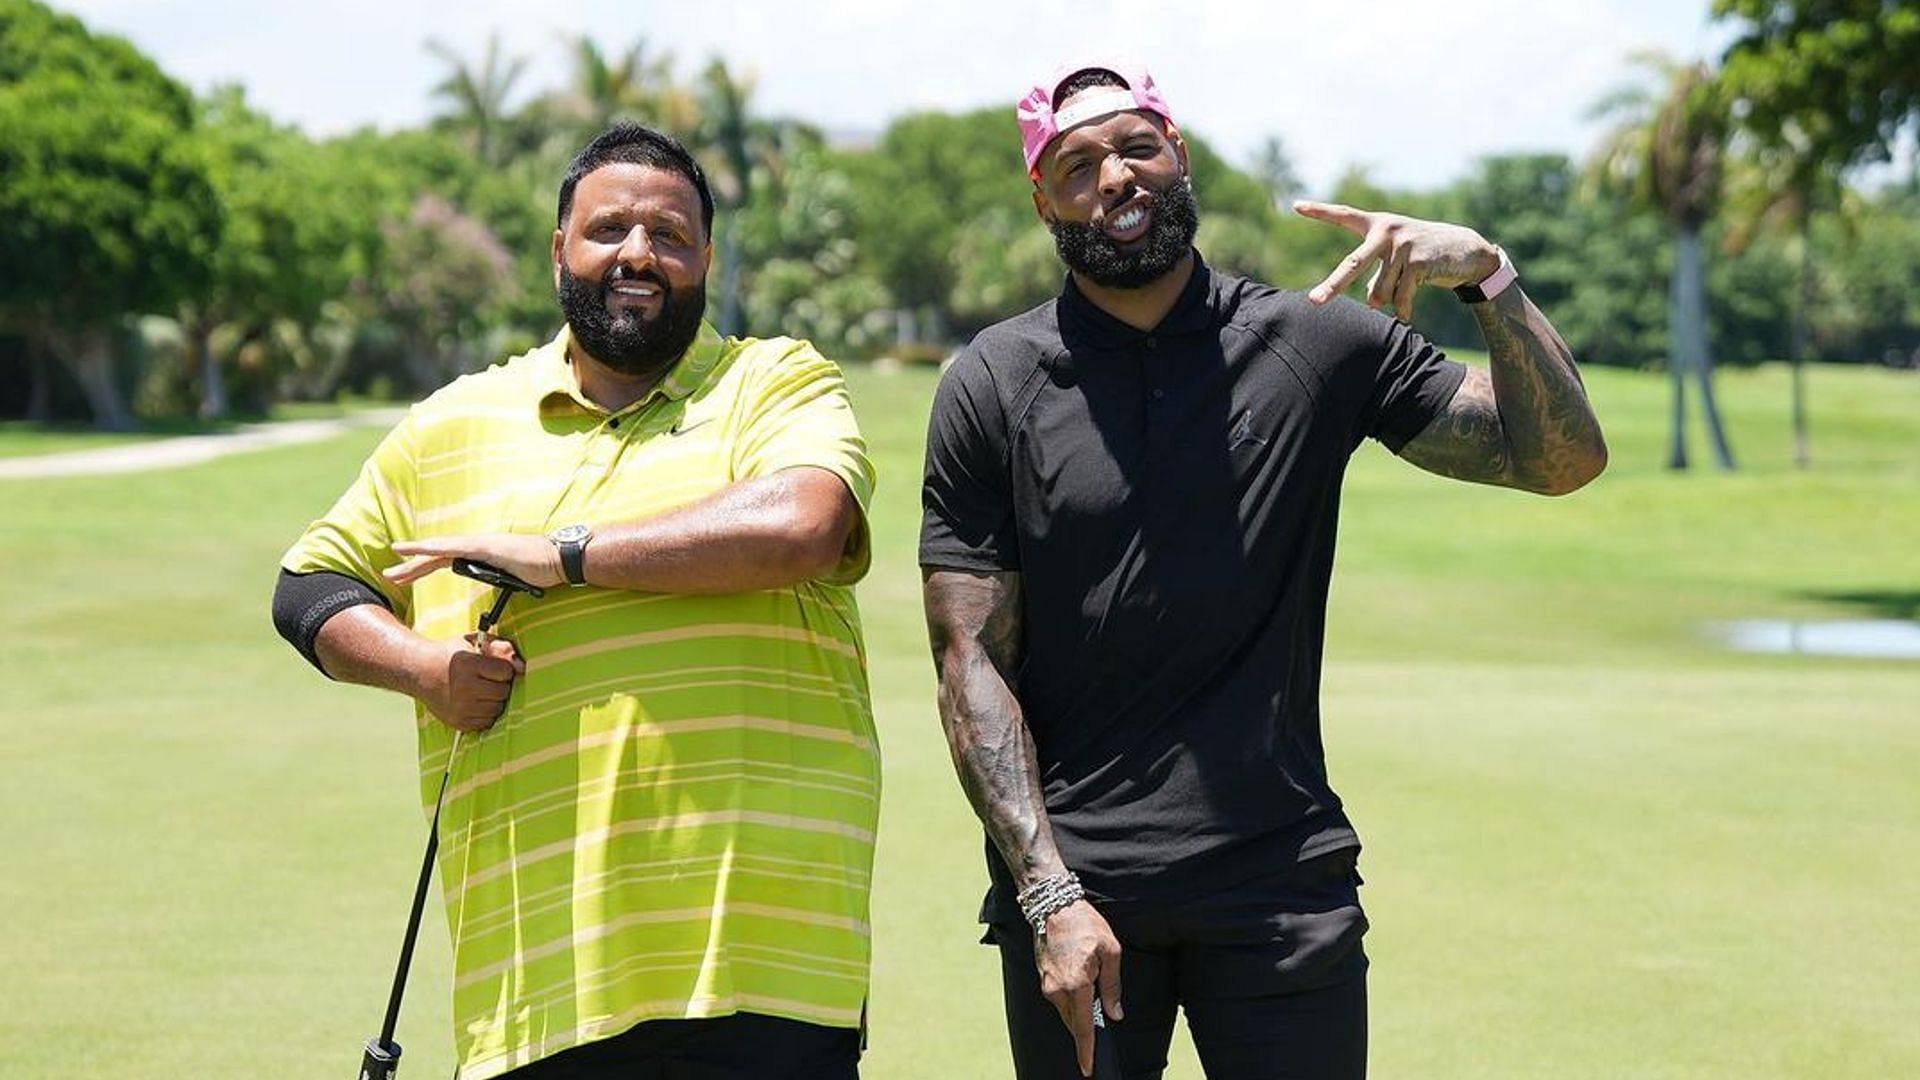 IN PHOTOS: Odell Beckham Jr. enjoys golf outing with DJ Khaled following  $15M move to Ravens